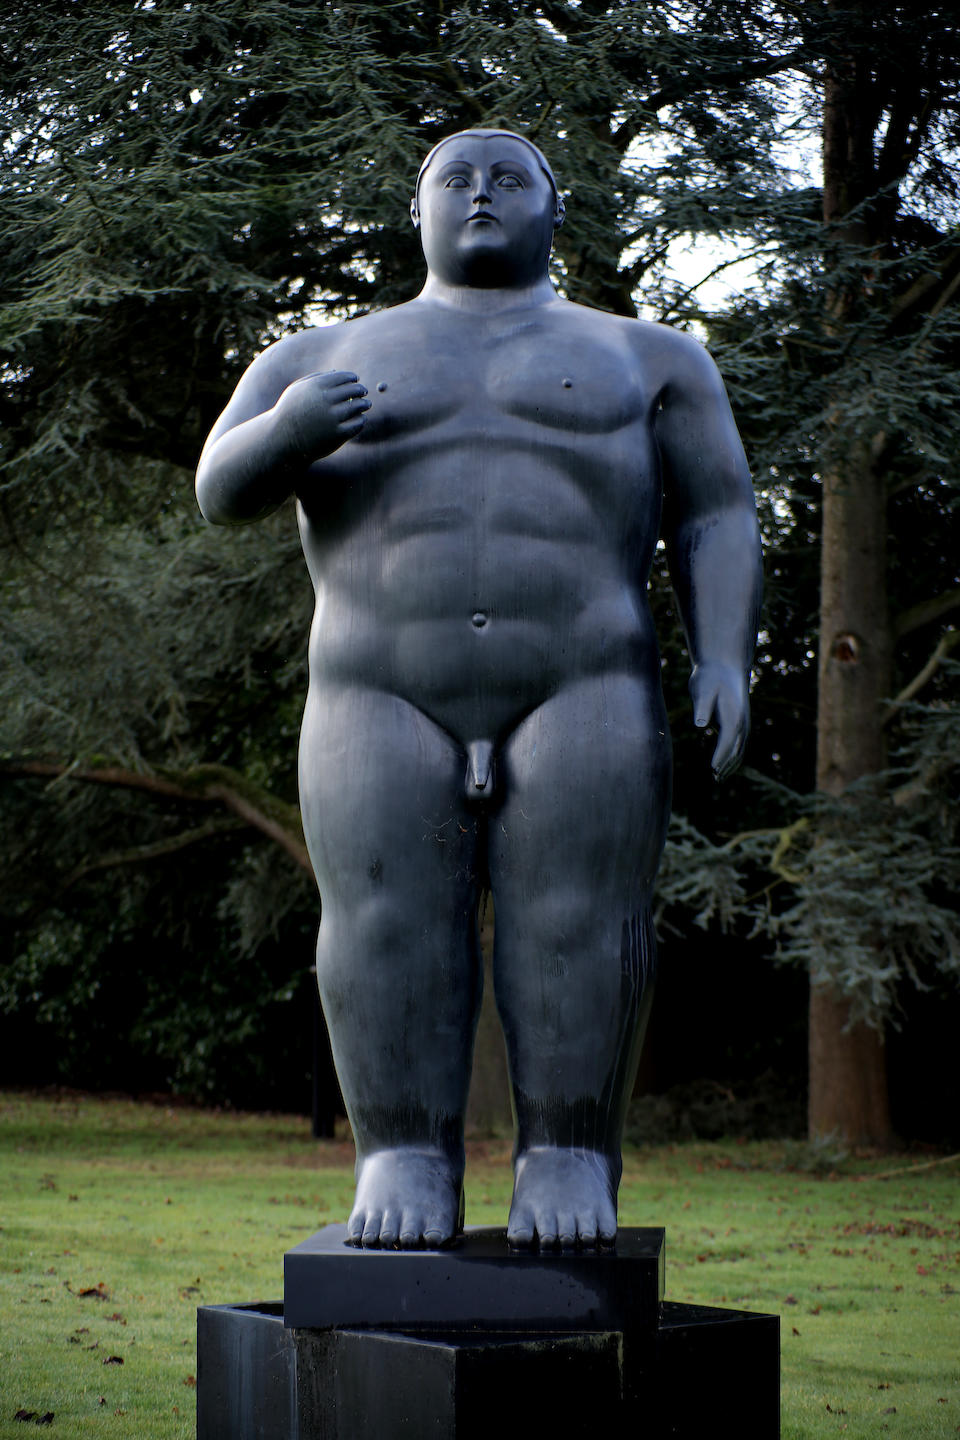 Fernando Botero (Colombian, born 1932) Adam and Eve, 2003each signed, numbered '3/3' and with the 'Fonderia Mariani Pietrasanta Italy' stamp (to the base)bronzeAdam 120cm  wide x 96cm deep x 337cm high (47 1/4in wide x 37 13/16in deep x 141 5/16in high) Eve 120cm wide x 90cm deep x 359cm high (47 1/4in wide x 35 7/16in deep x 141 5/16in high) This work was conceived in 2003, and is number 3 from an edition of 3.